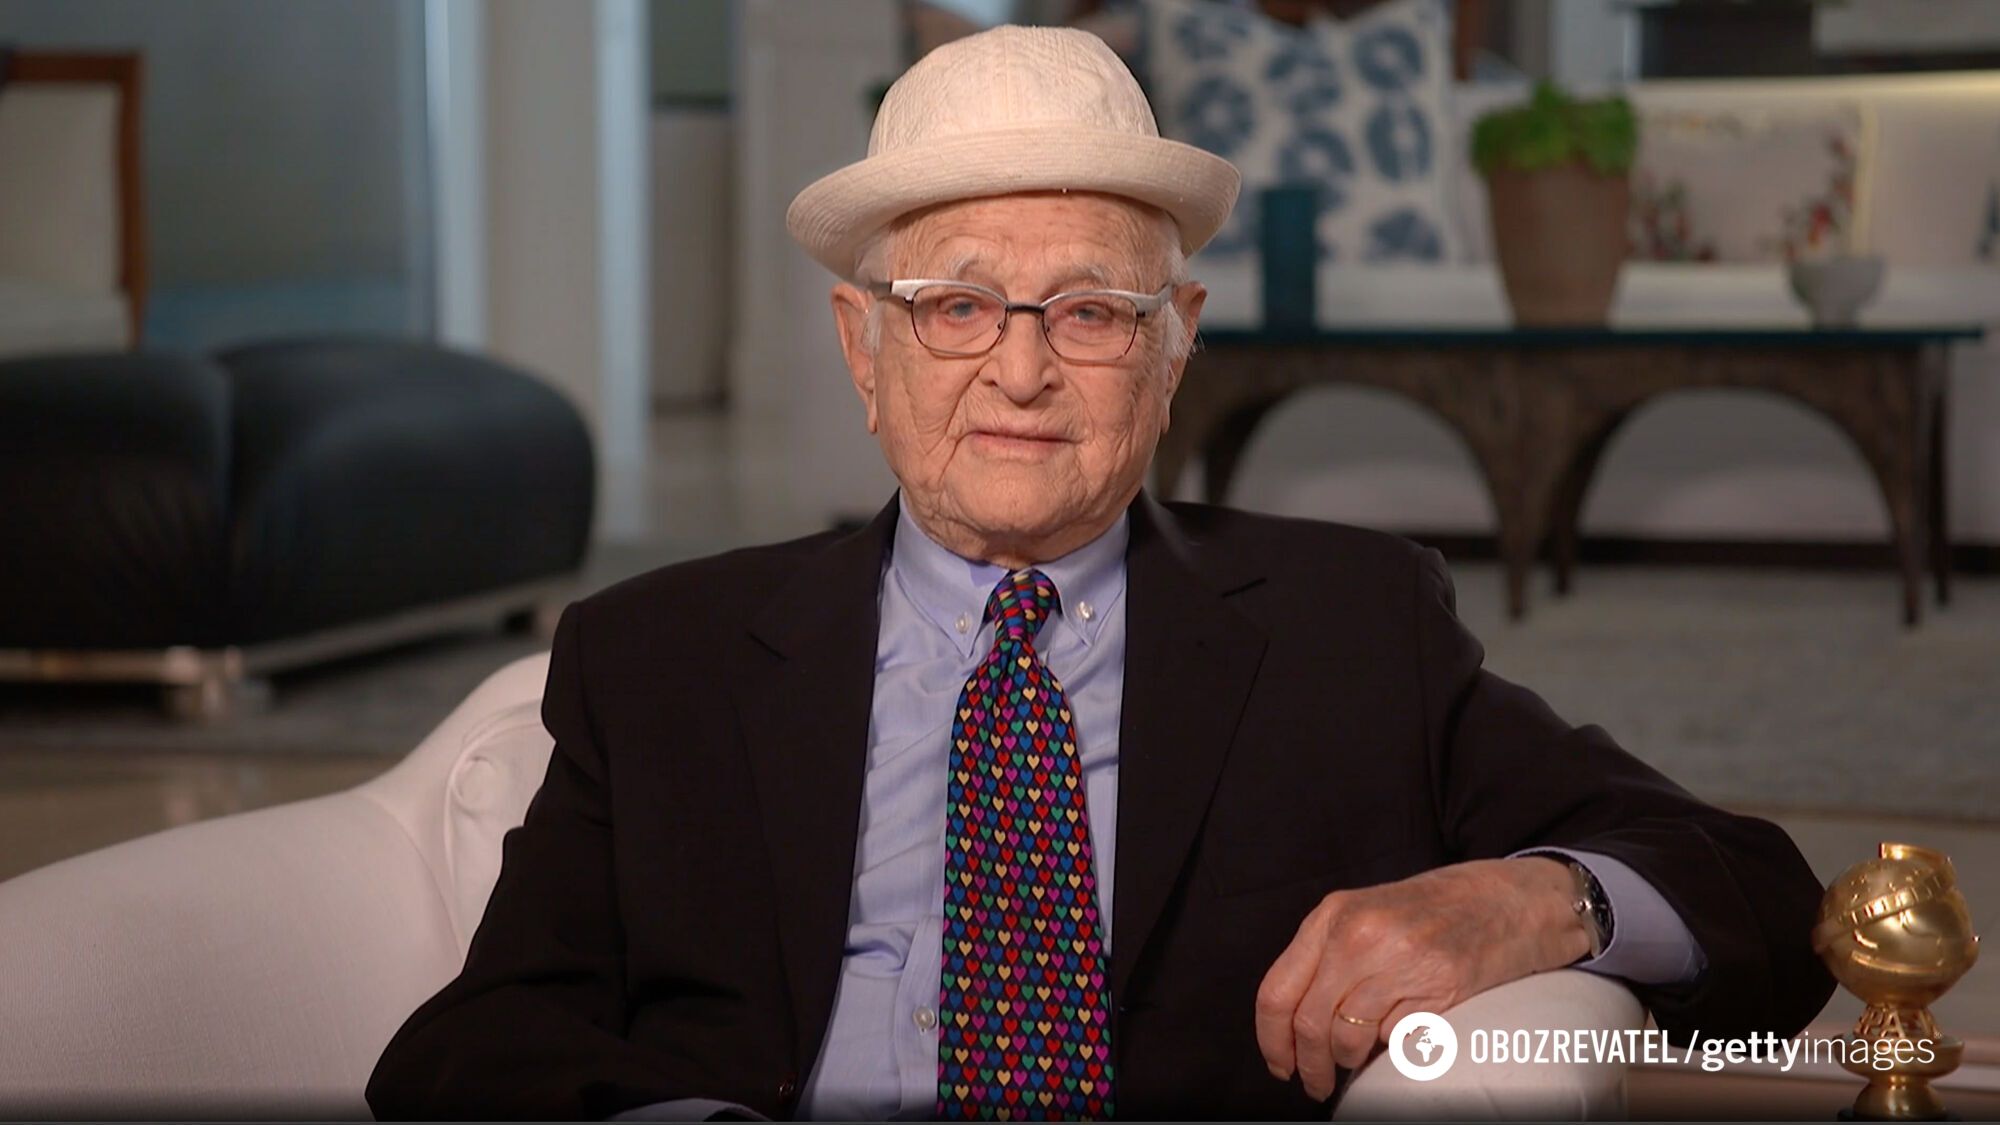 Living in the here and now: the secret of longevity of legendary producer Norman Lear, who passed away at the age of 101, has been revealed